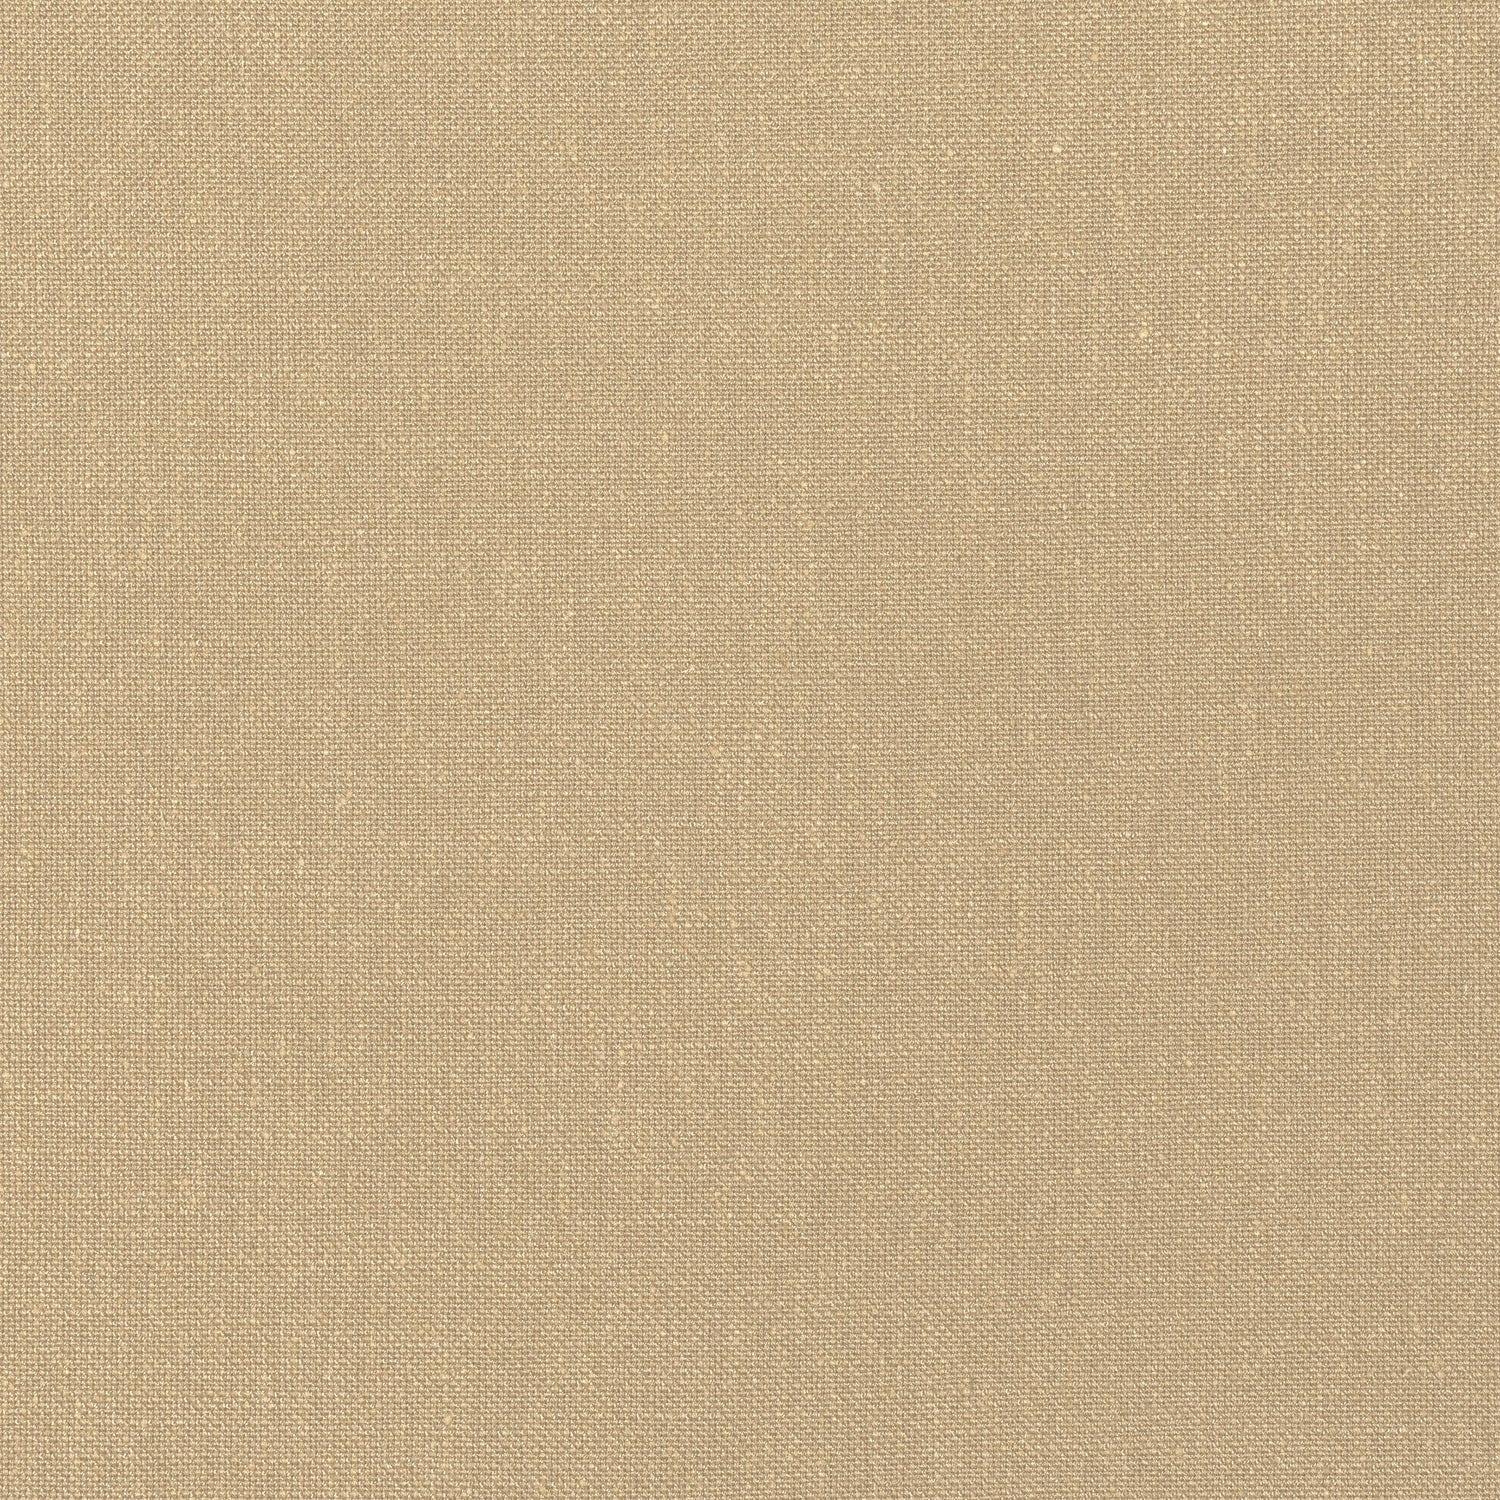 Palisade Linen fabric in sahara color - pattern number FWW7659 - by Thibaut in the Palisades collection